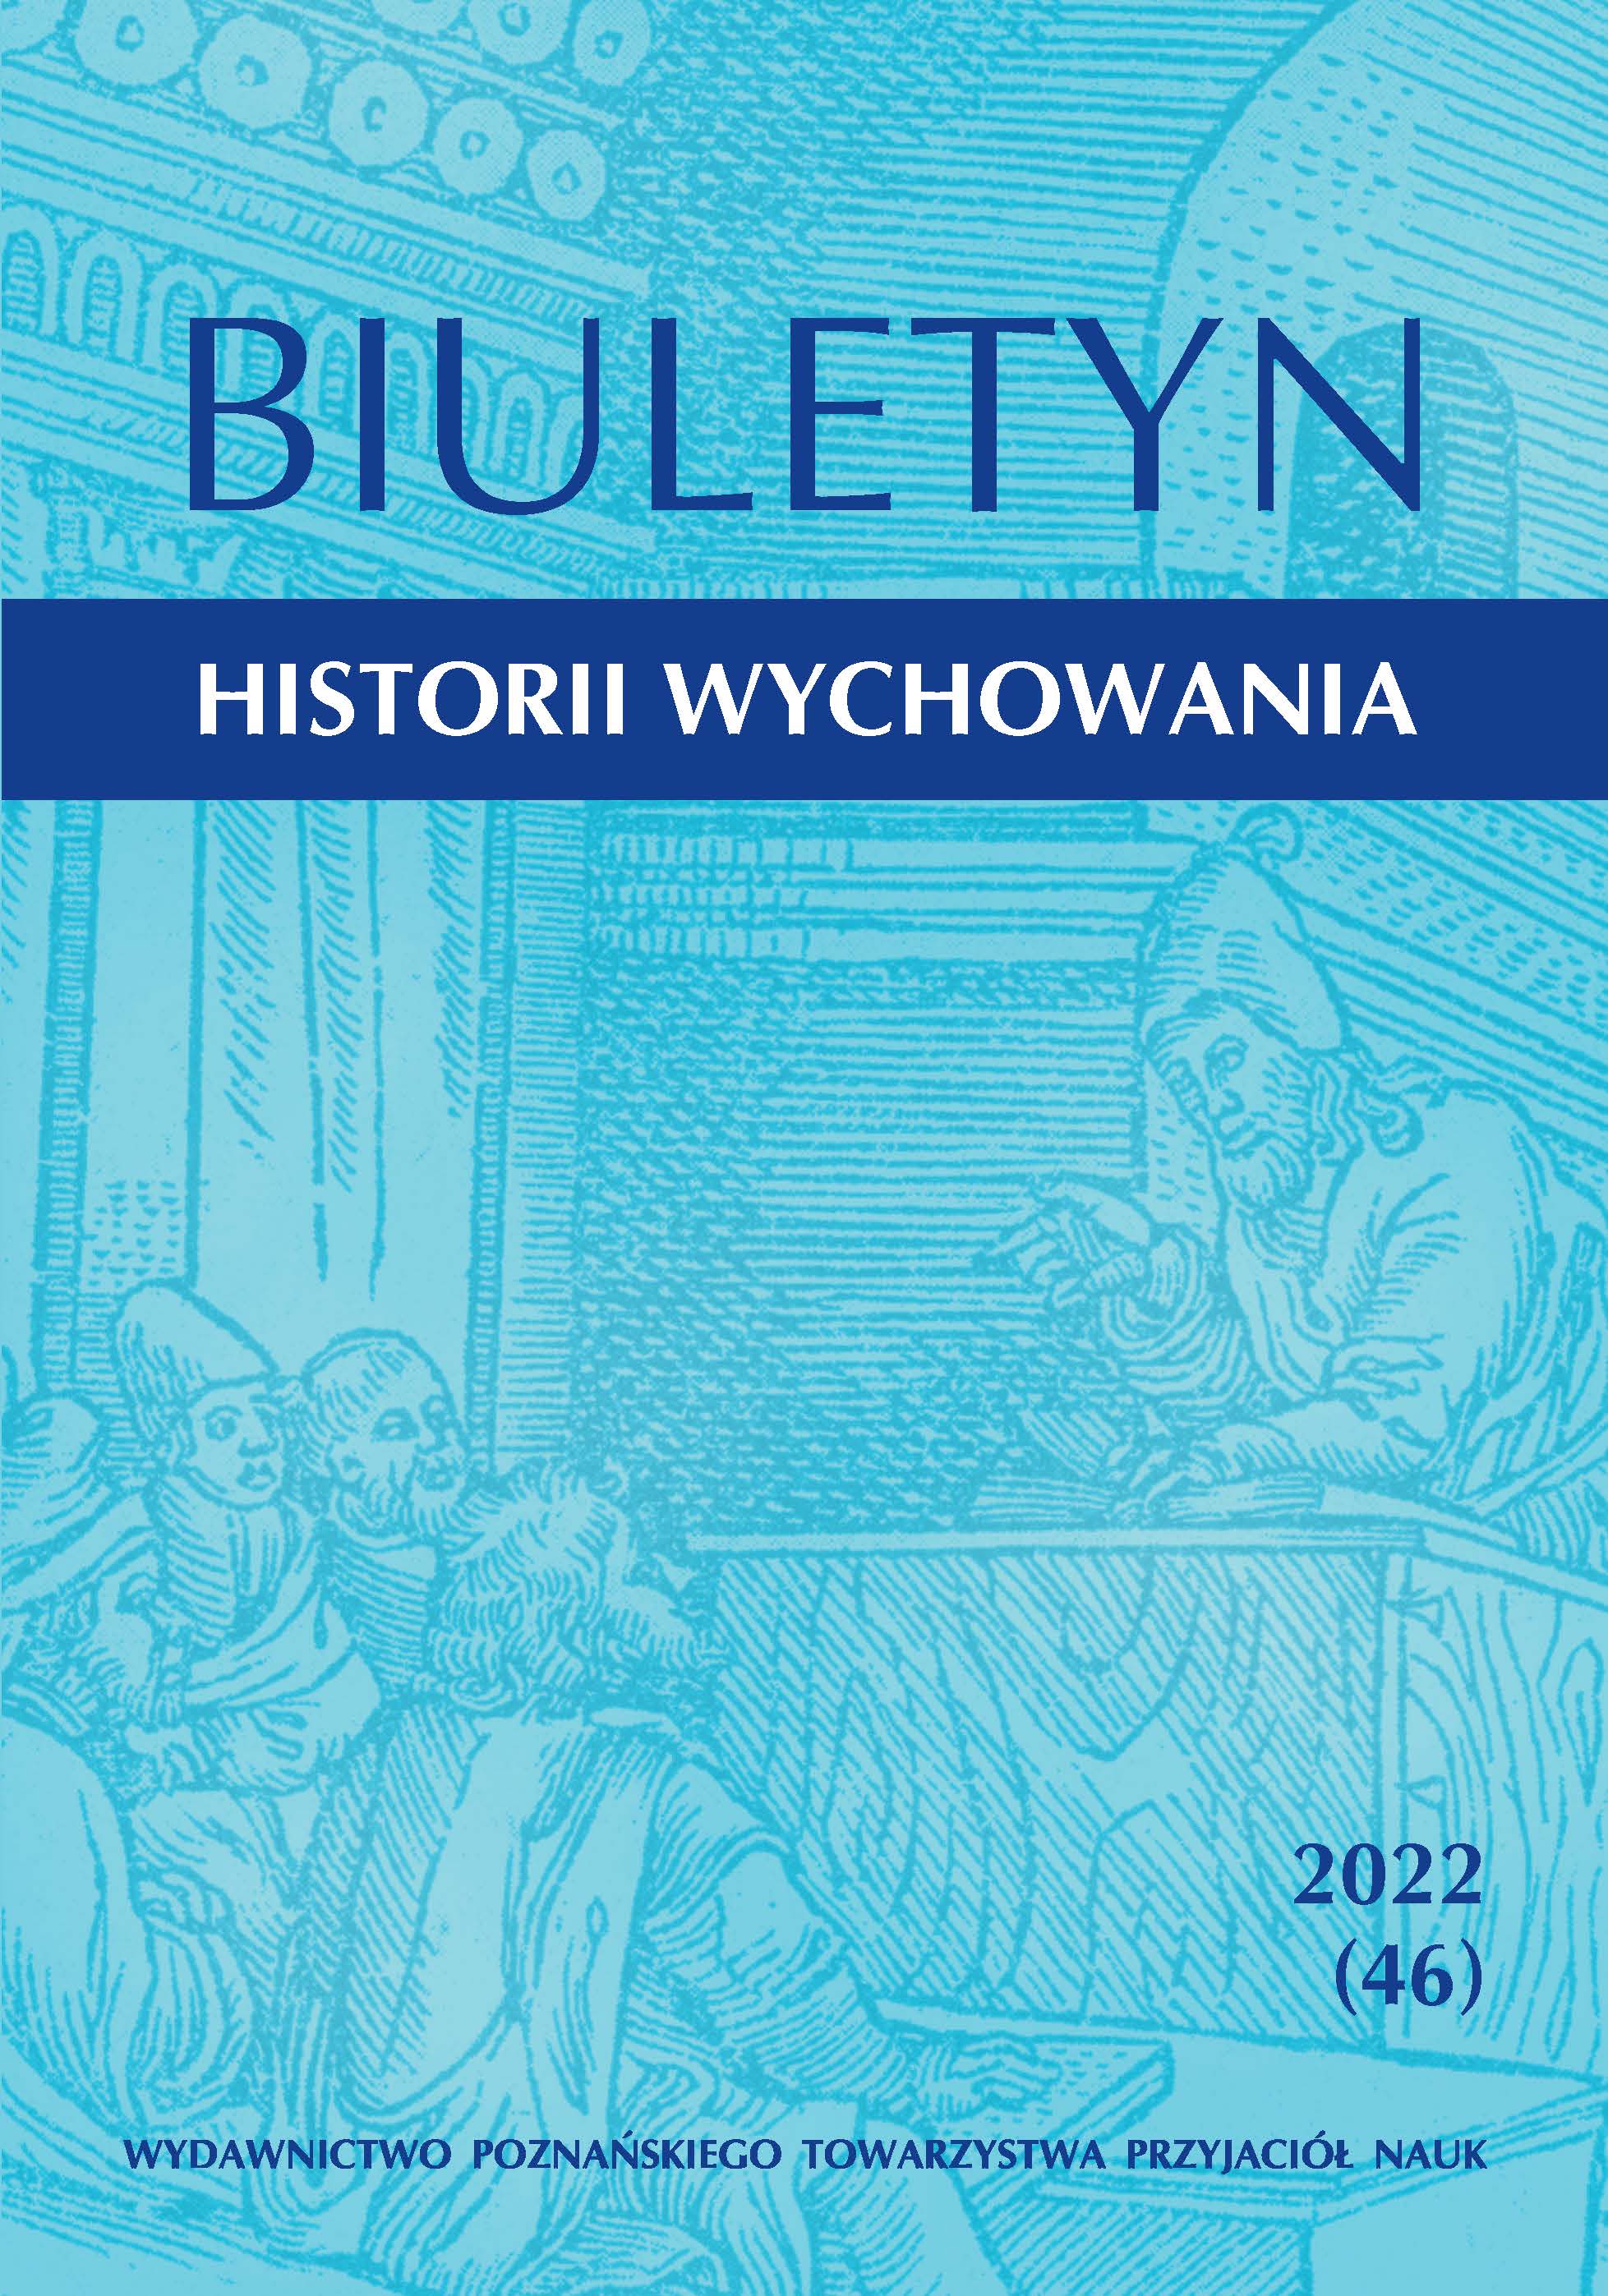 Cultural Conditions of Constructing Hegemonic Masculinity in the Polish Environment of West Prussia
in the in the Mid-19th Century